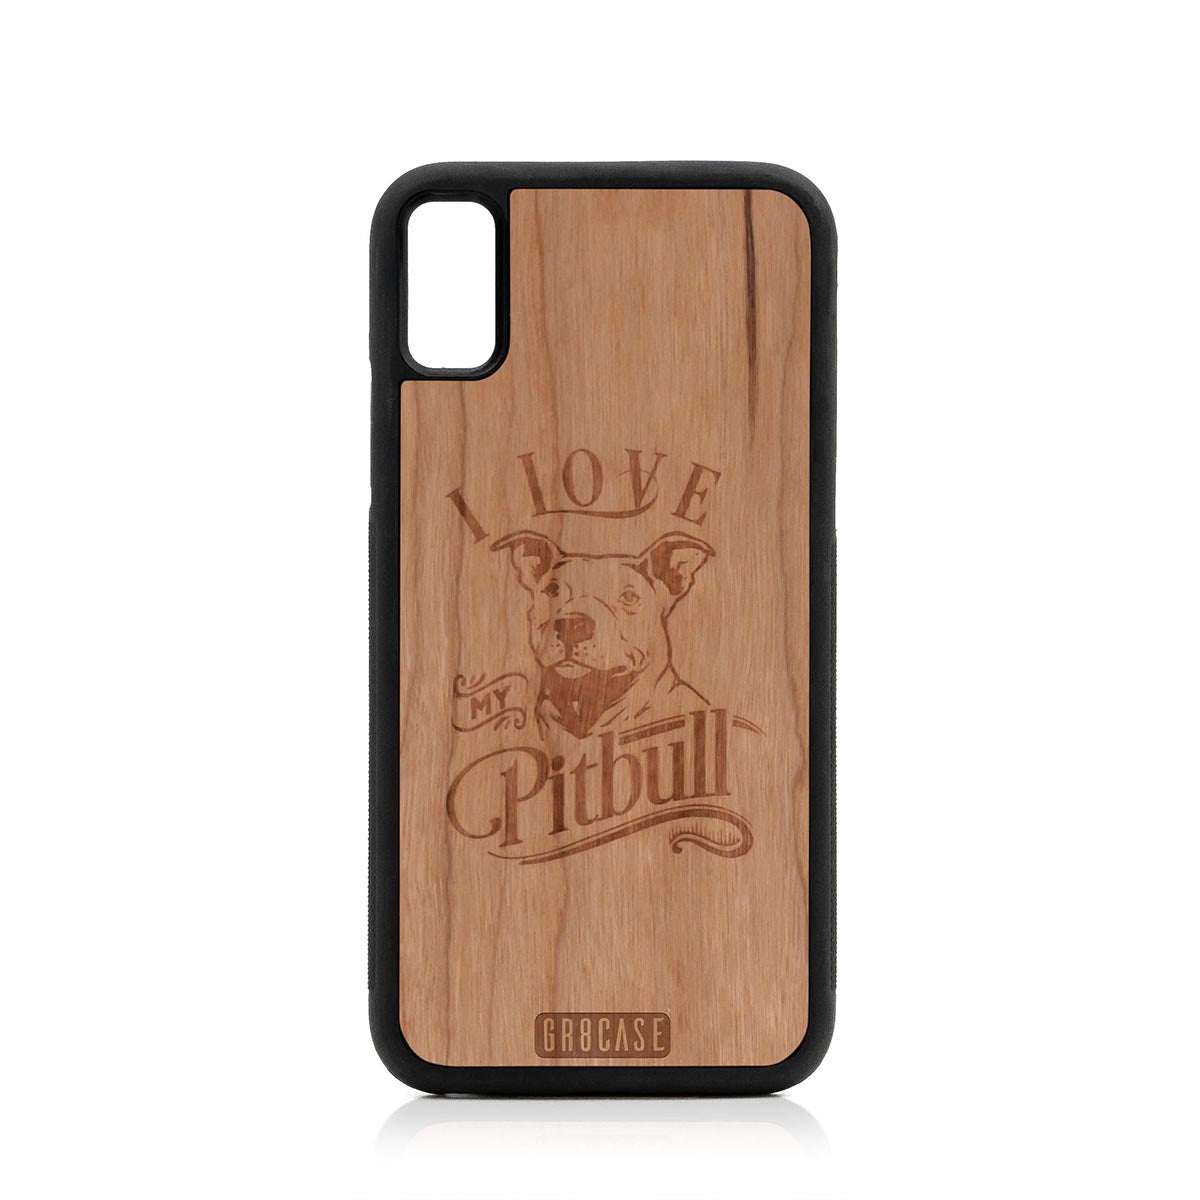 I Love My Pitbull Design Wood Case For iPhone XS Max by GR8CASE